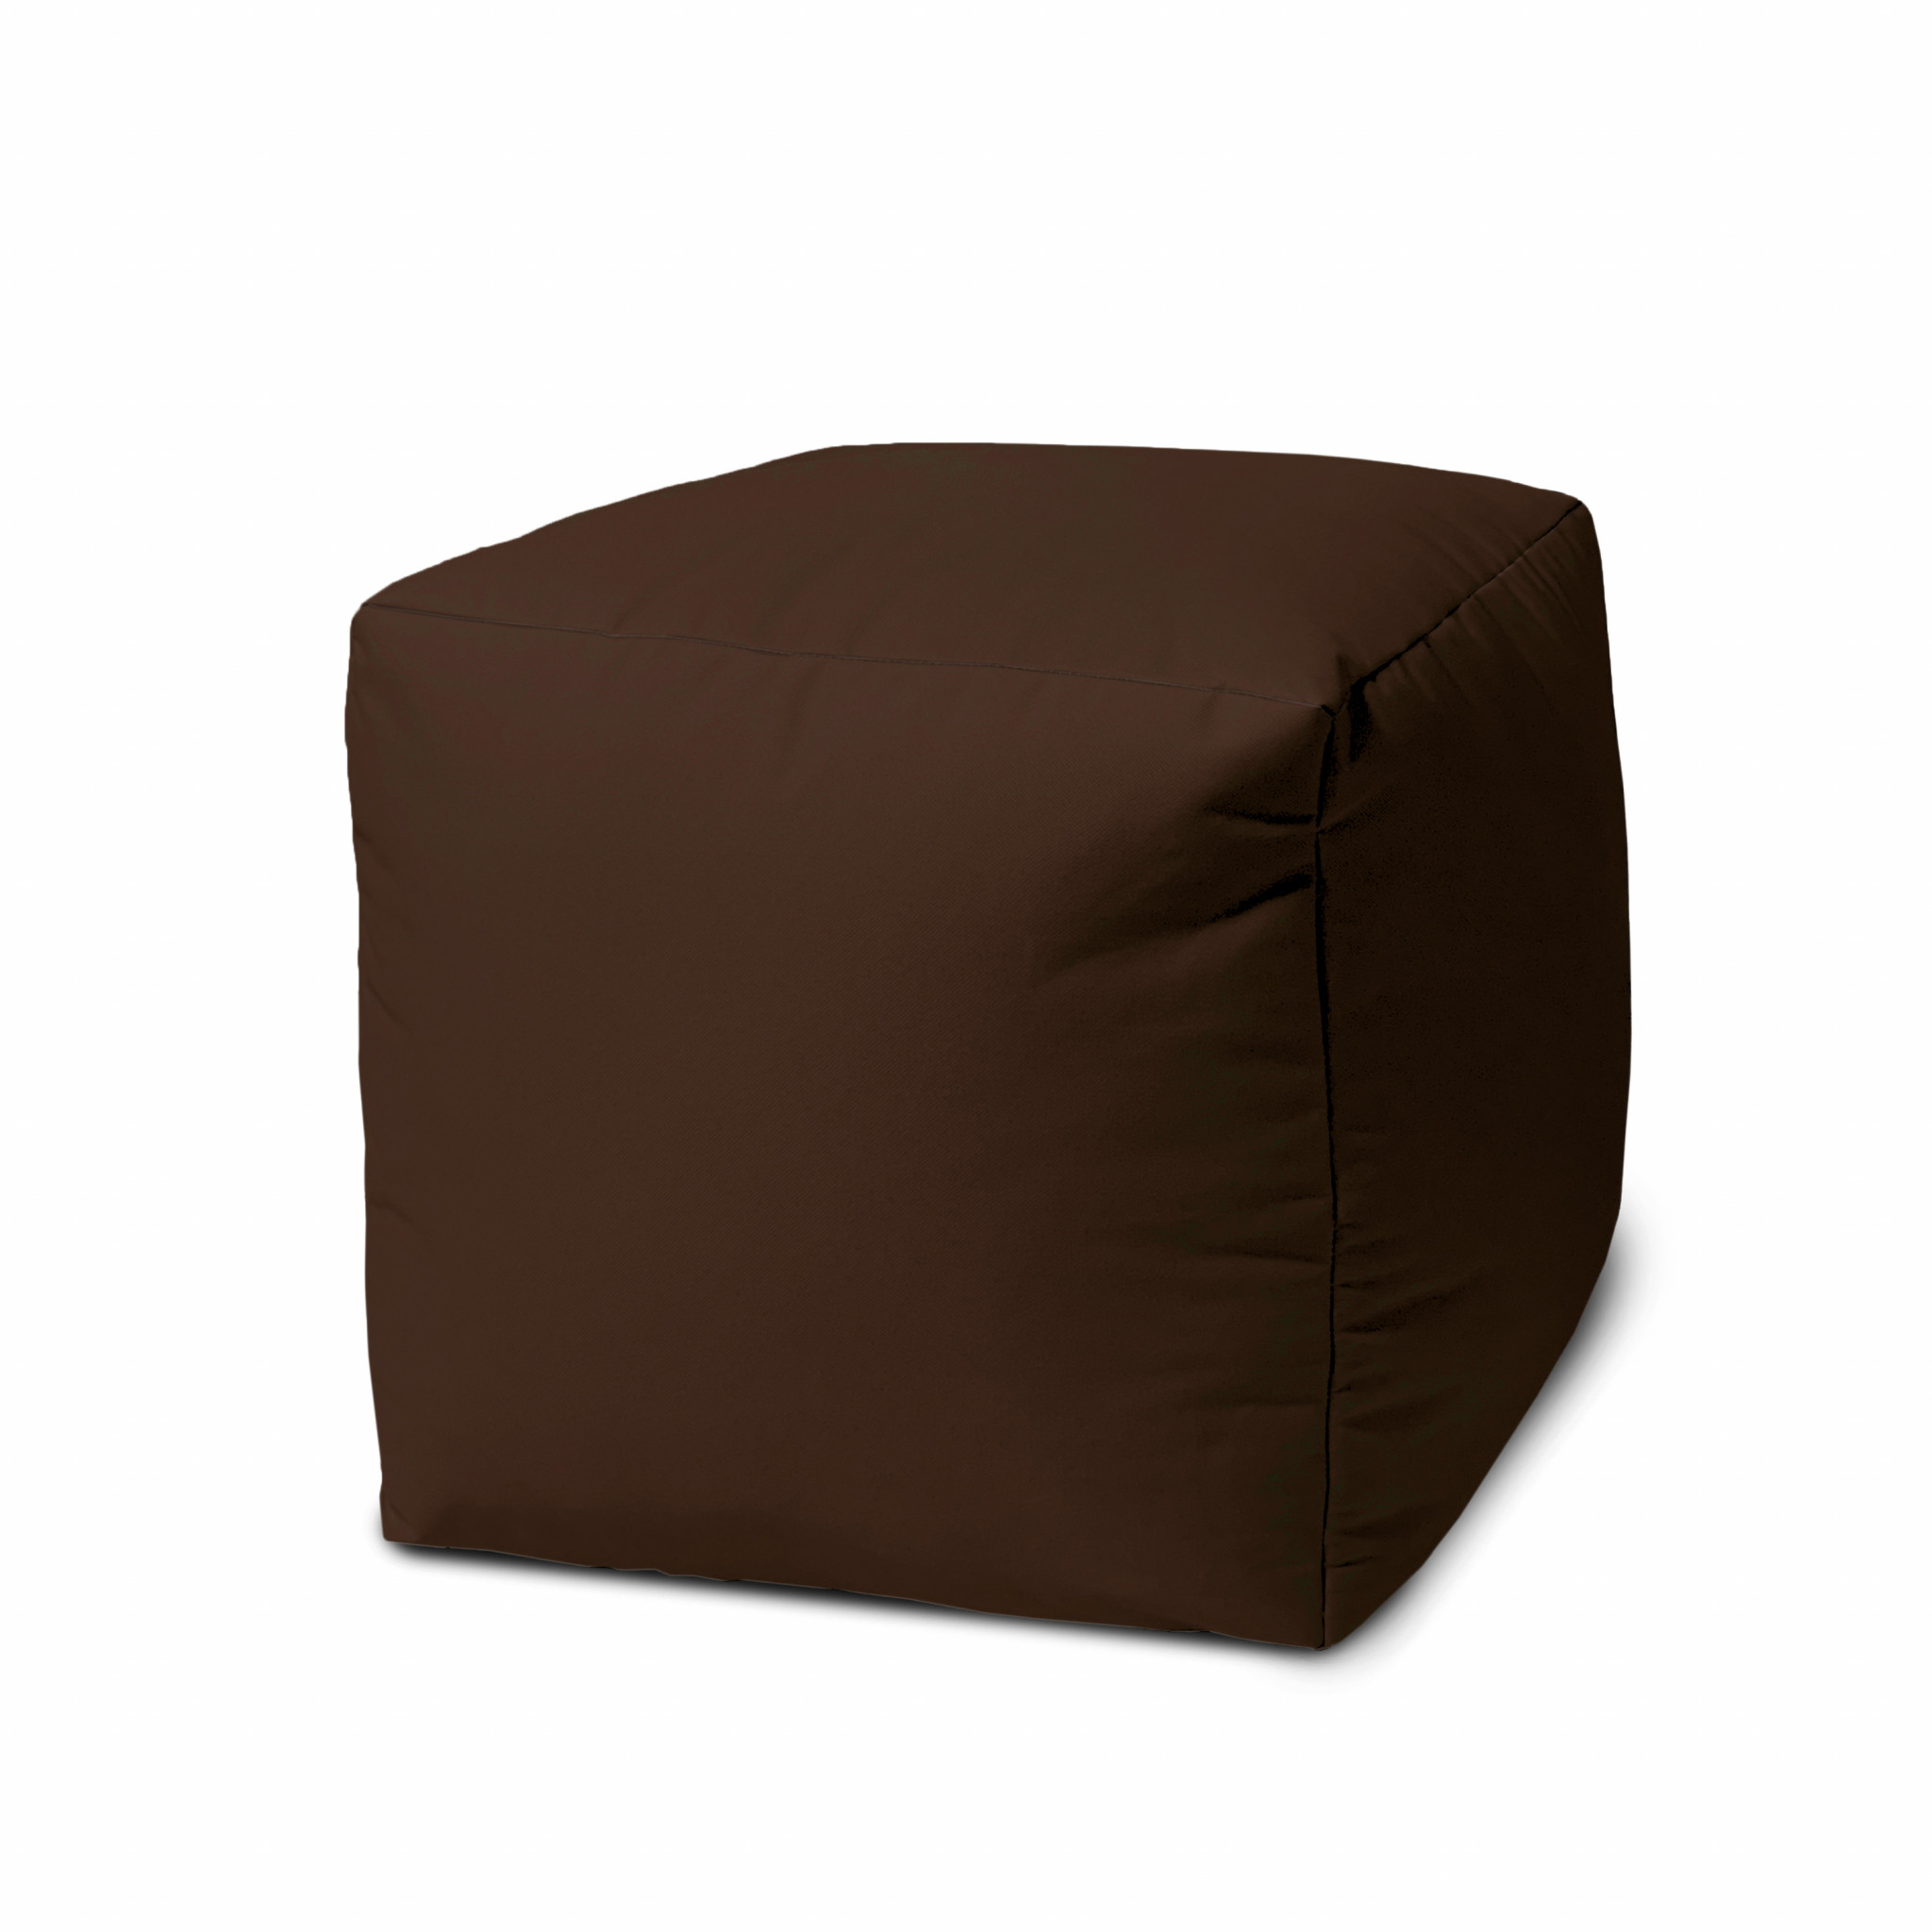 17" Cool Dark Chocolate Brown Solid Color Indoor Outdoor Pouf Ottoman-474186-1